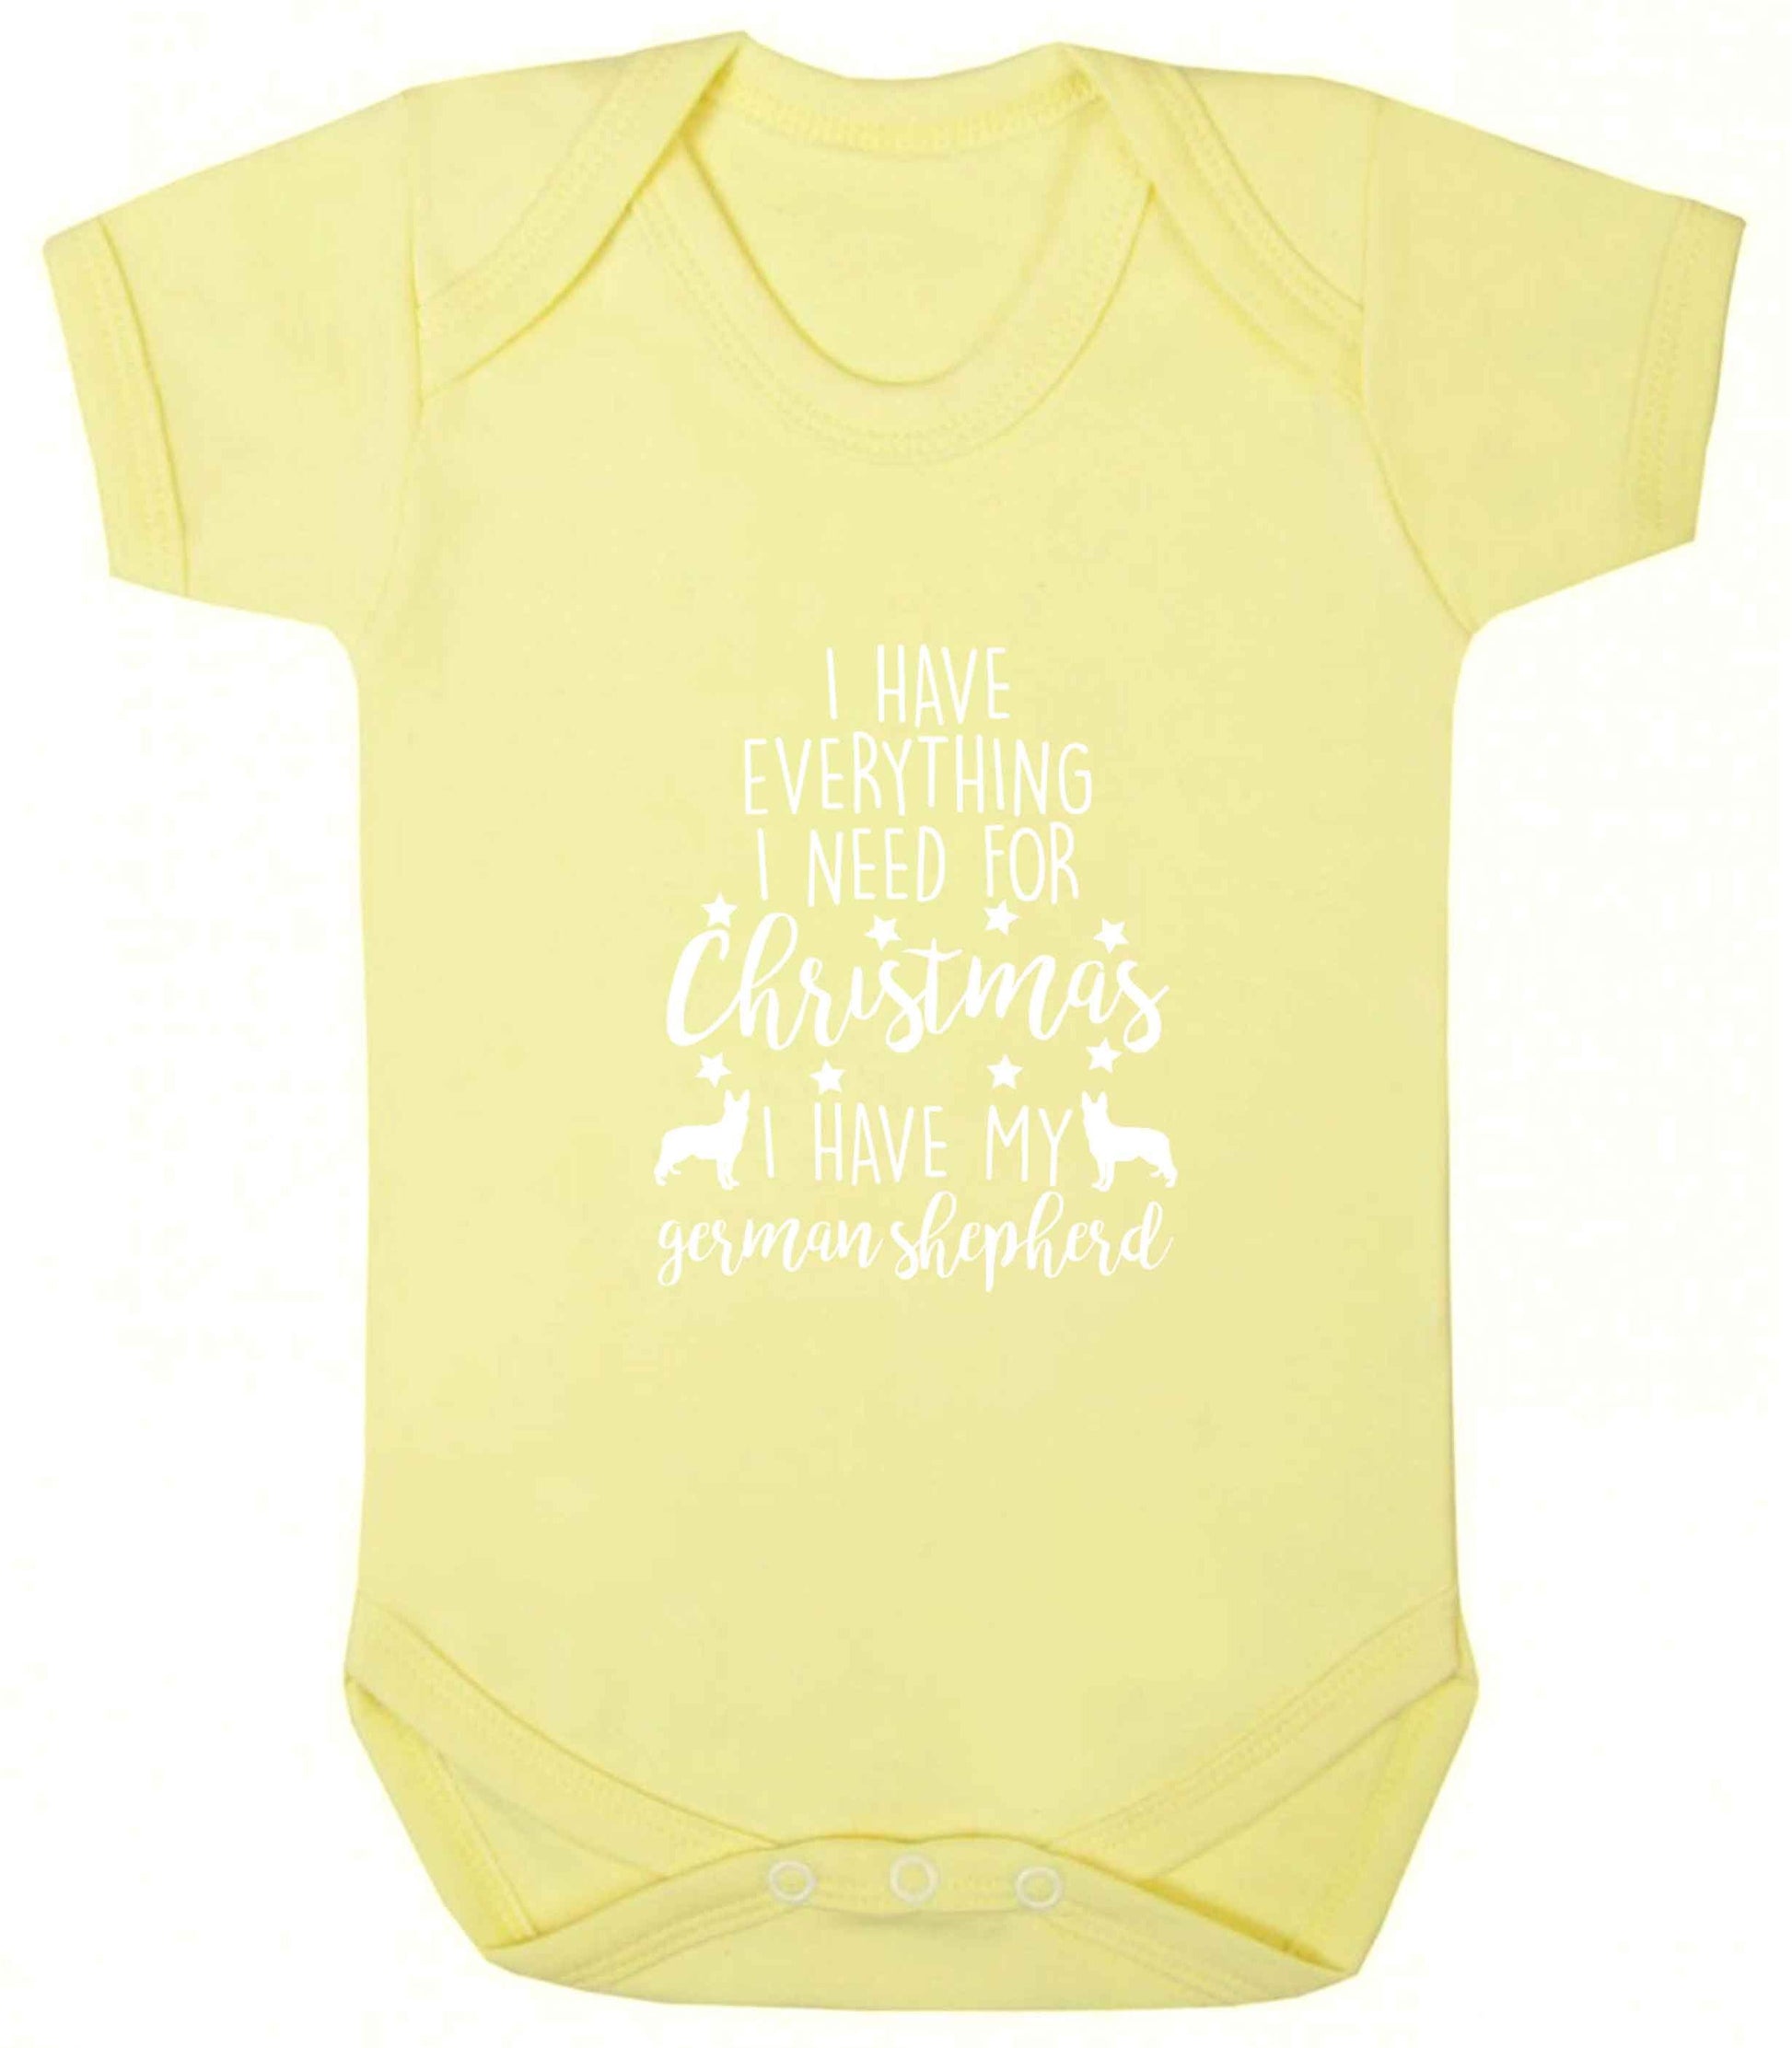 I have everything I need for Christmas I have my german shepherd baby vest pale yellow 18-24 months